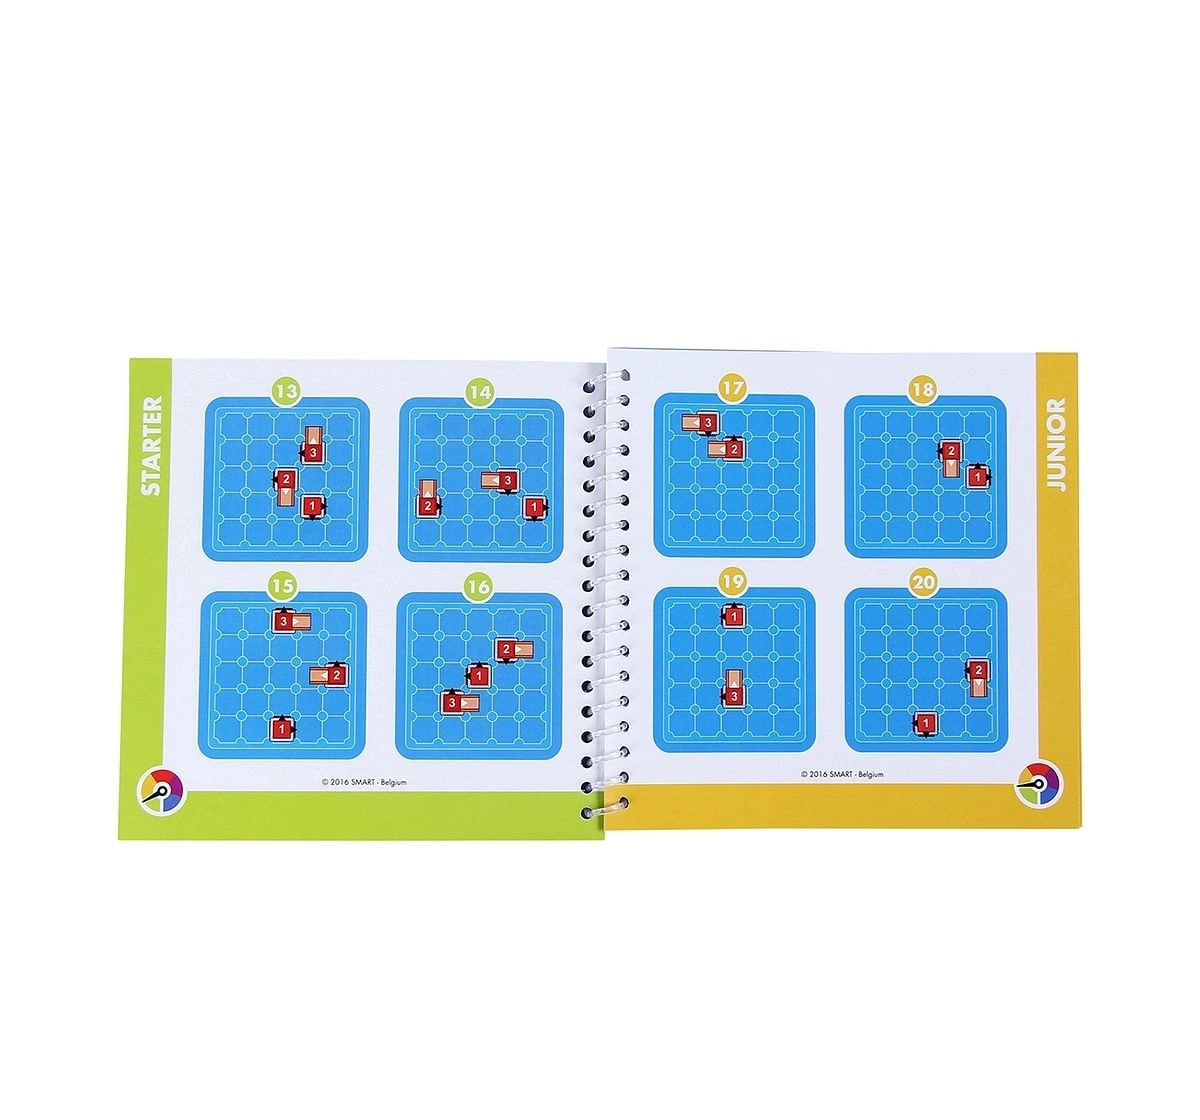 Smart Games Temple Connection for Kids age 7Y+ 